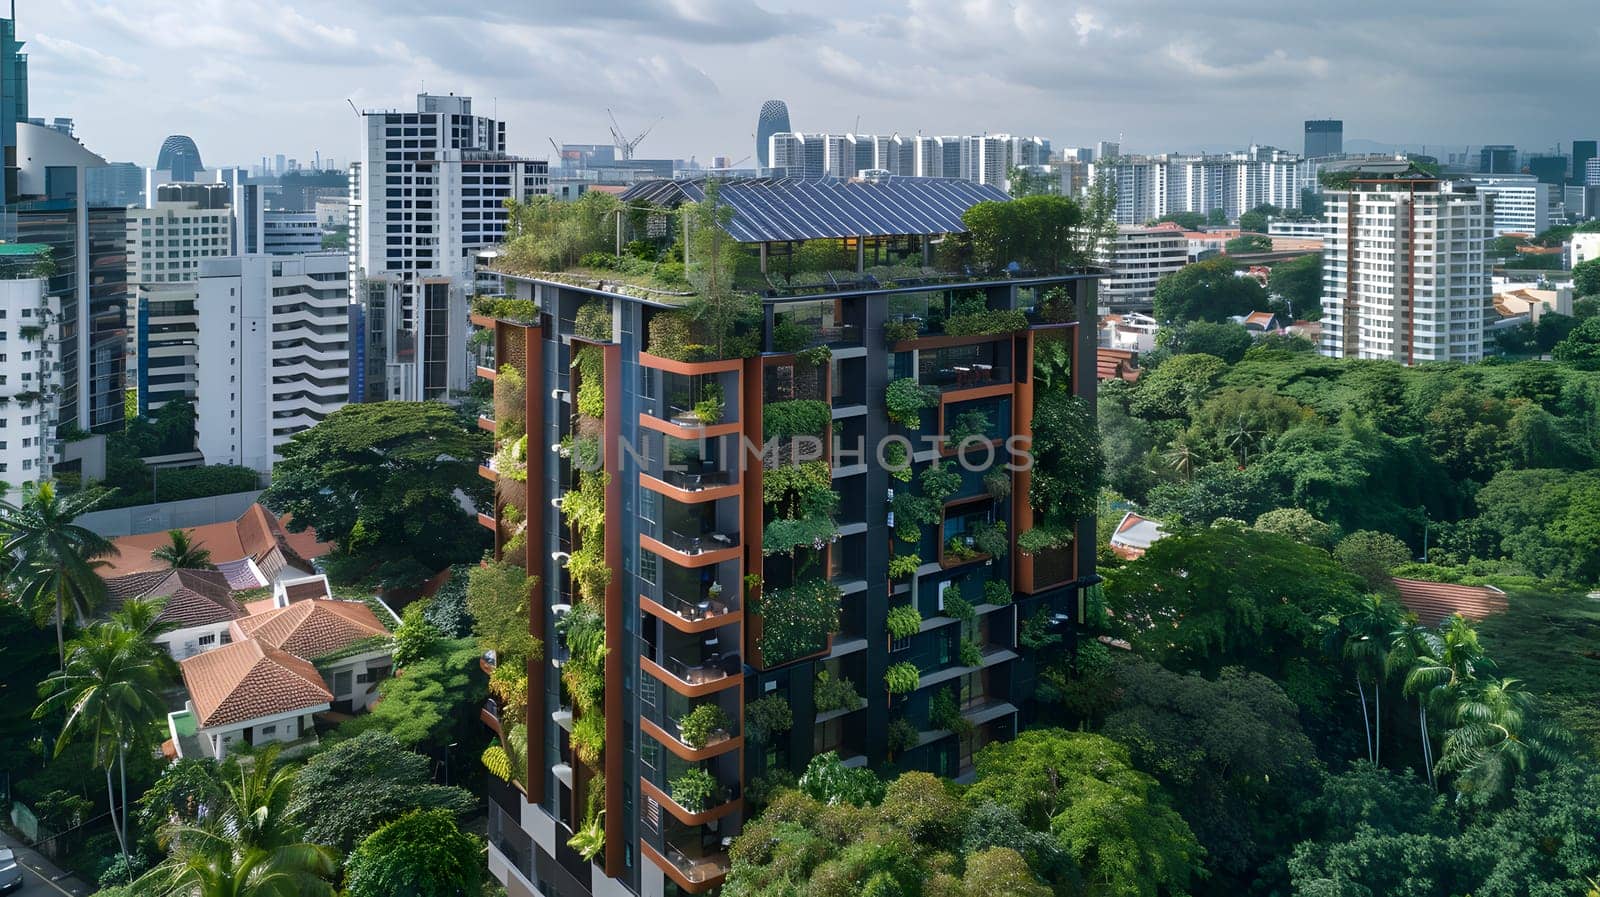 A tall building surrounded by trees and other buildings in a city, seen from above. Urban design blends with nature in this cityscape